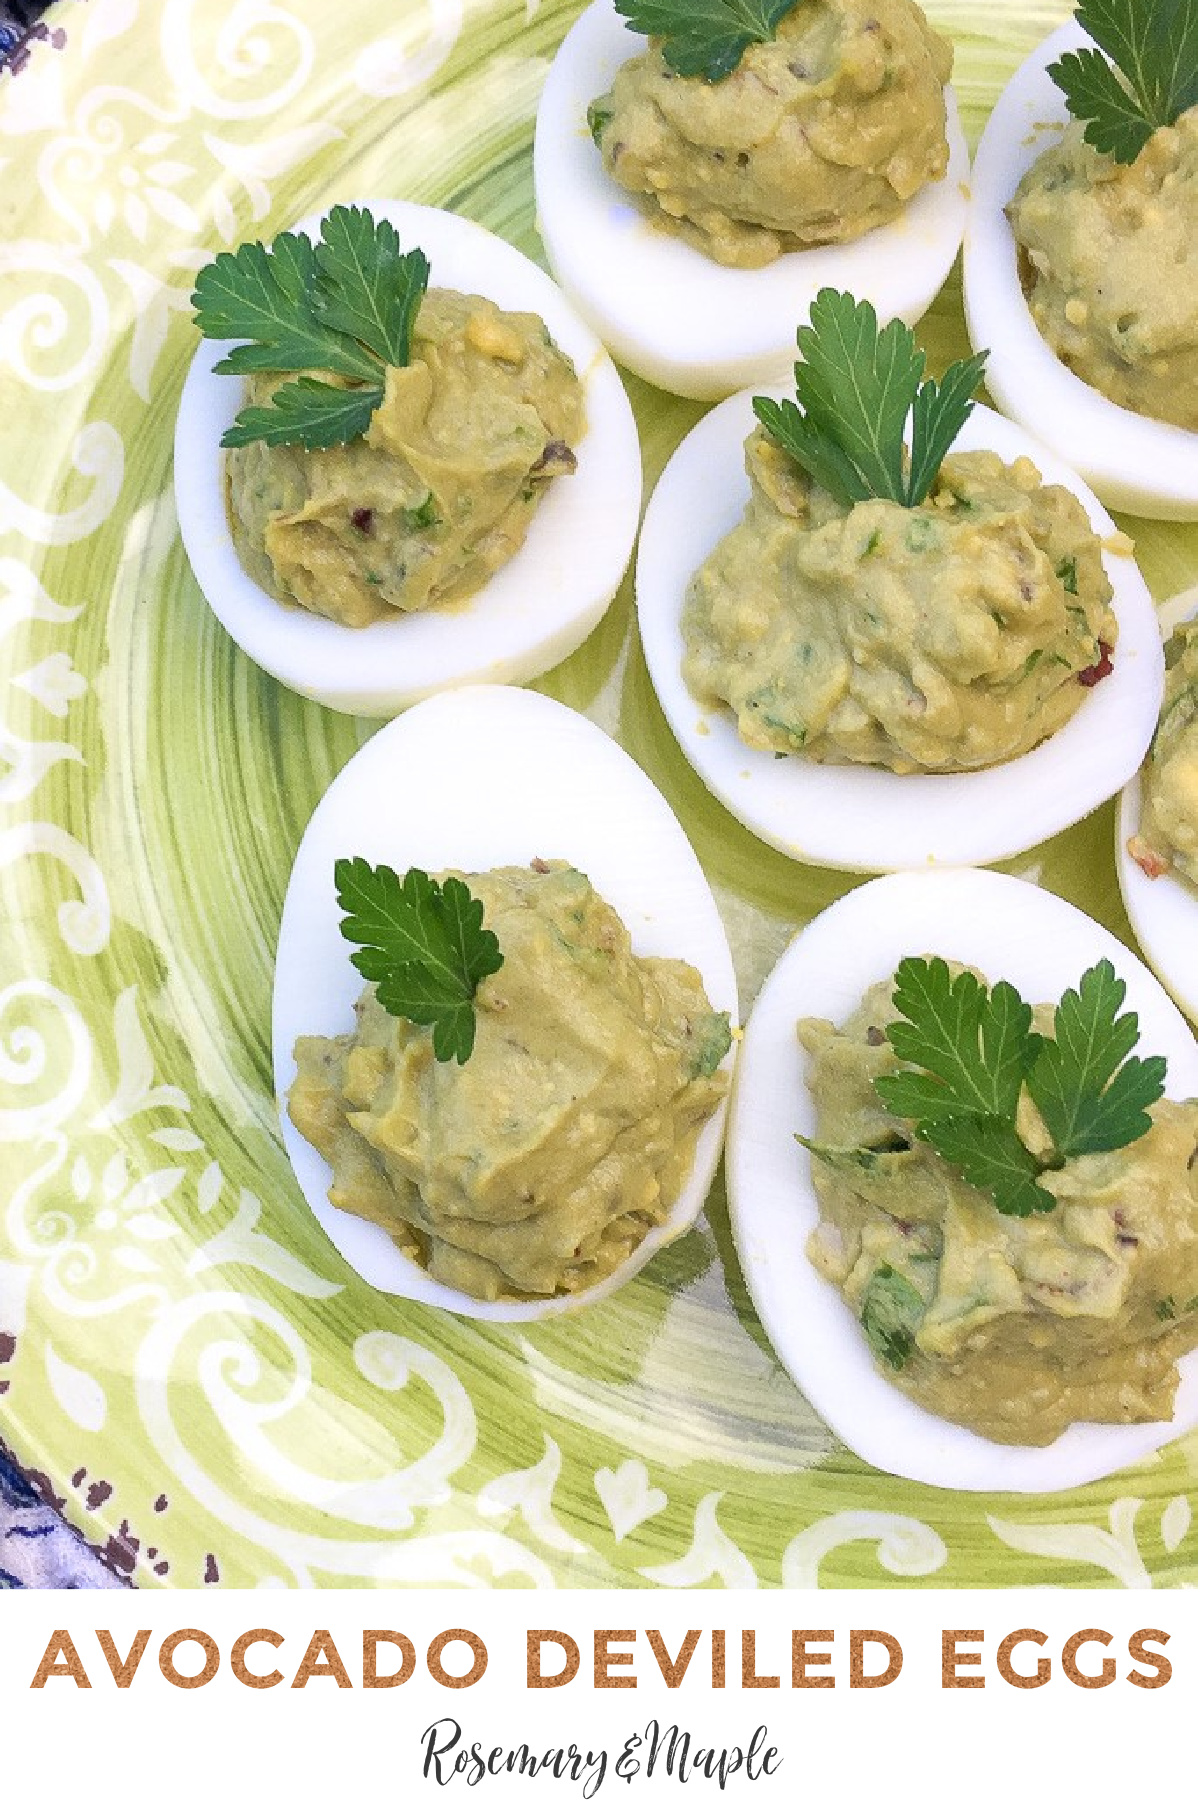 These avocado deviled eggs are creamy, easy to make, and the perfect appetizer for any occasion. It's a fun twist on classic deviled eggs.